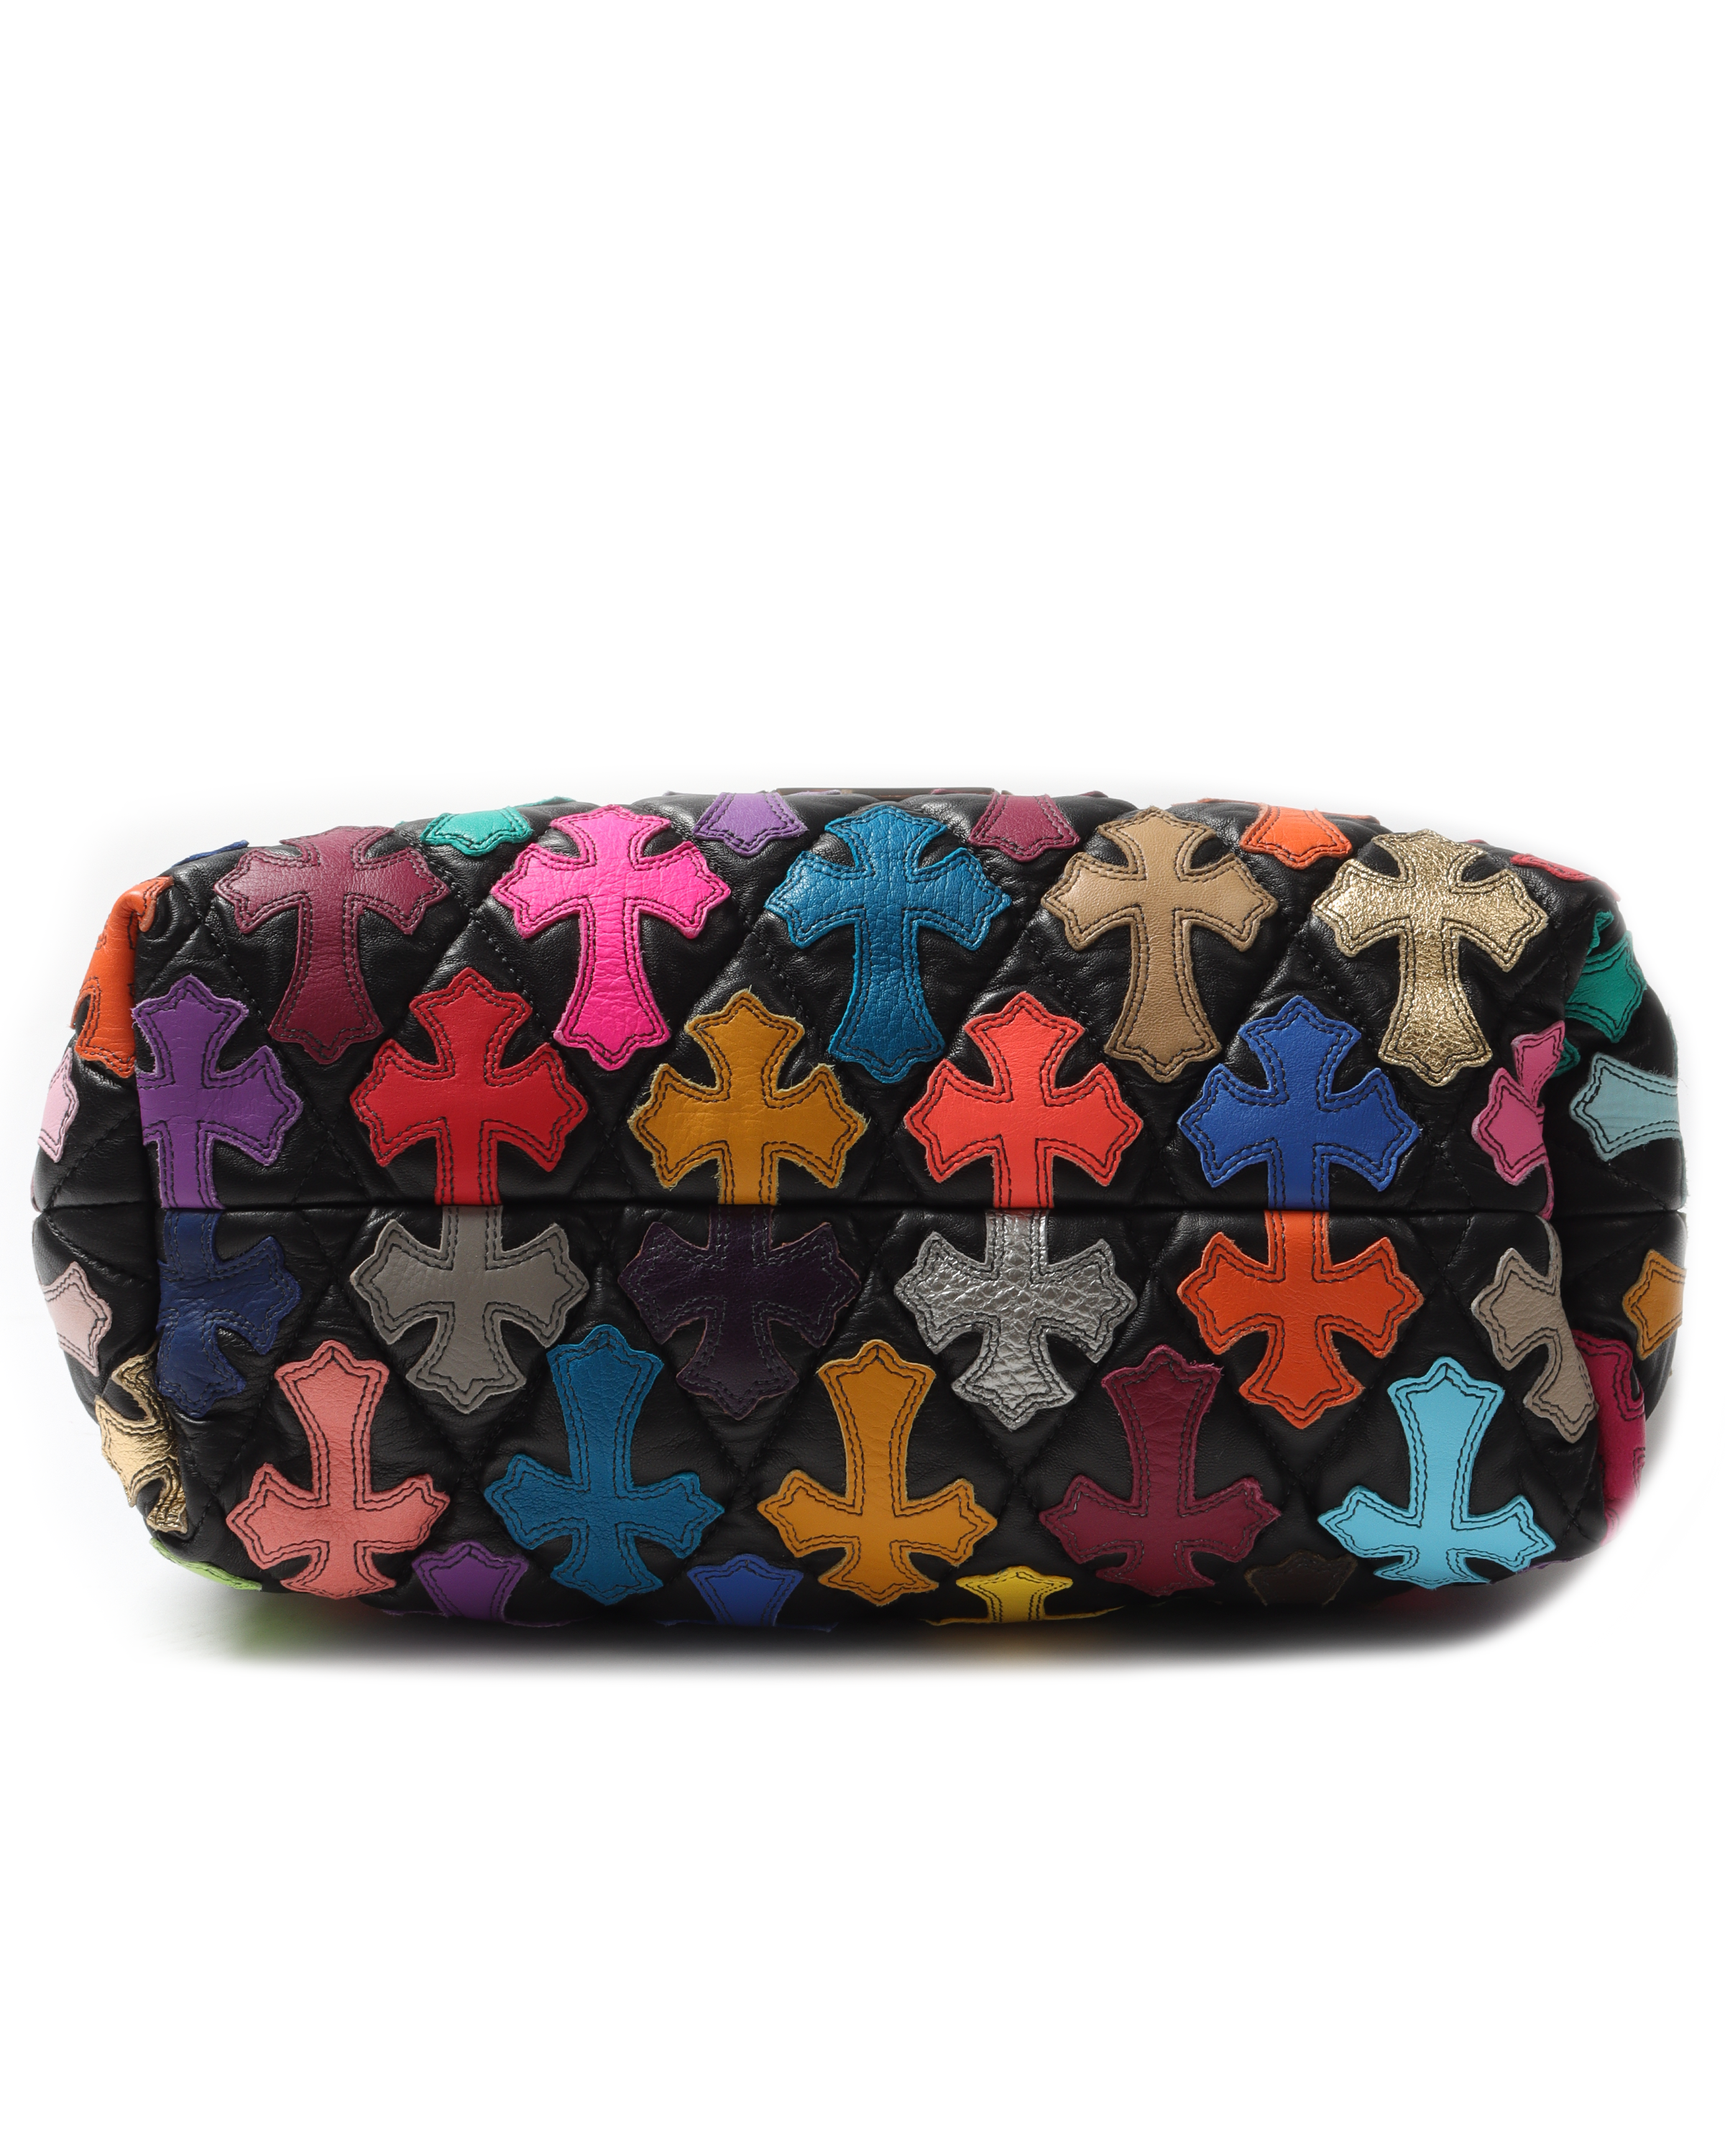 All-Over Cross Patch Quilted Leather Bag